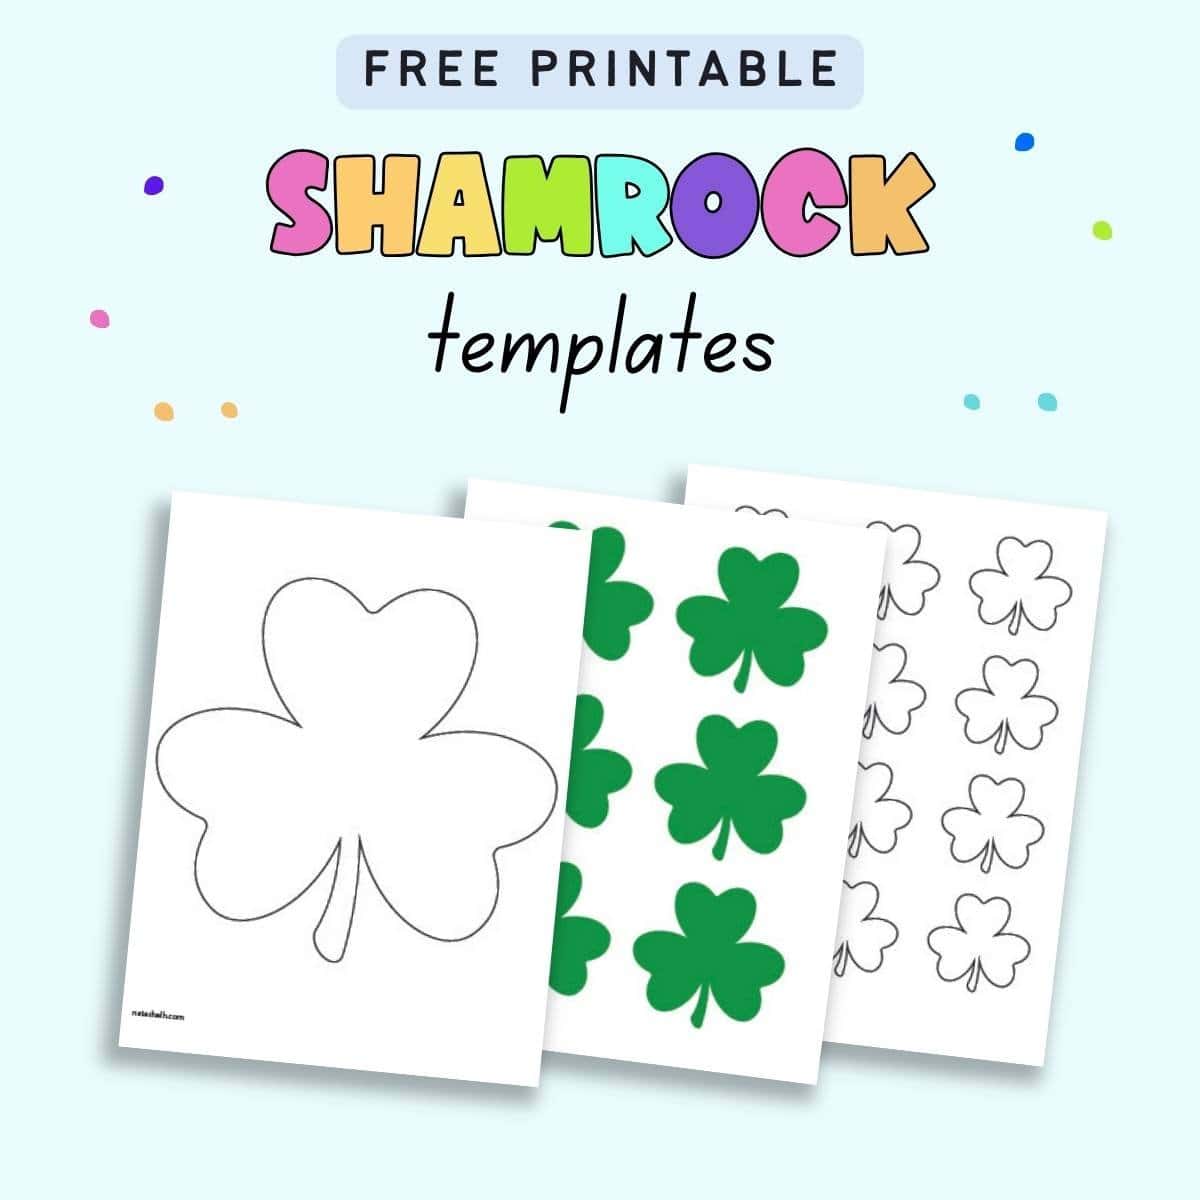 Text "free printable shamrock templates" with a  preview of three pages of shamrock printable template